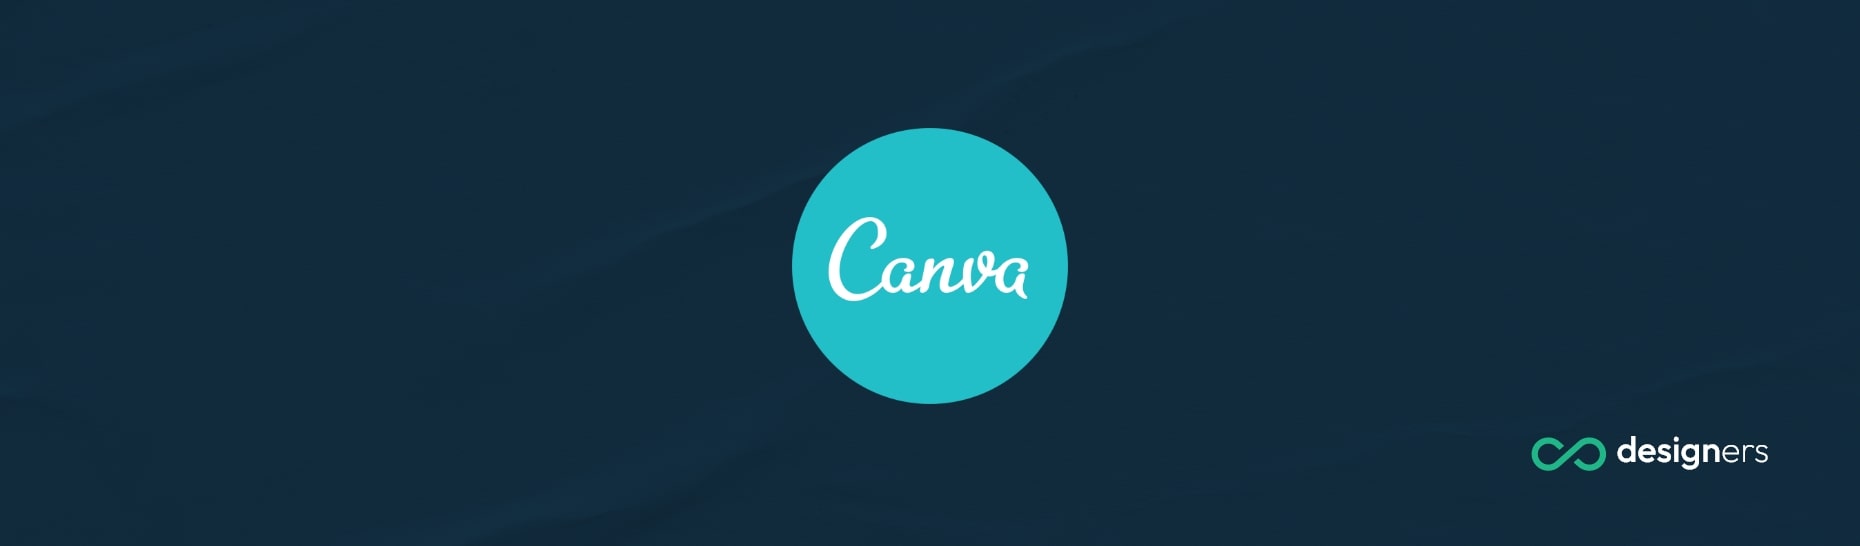 Does Canva Have Filters?